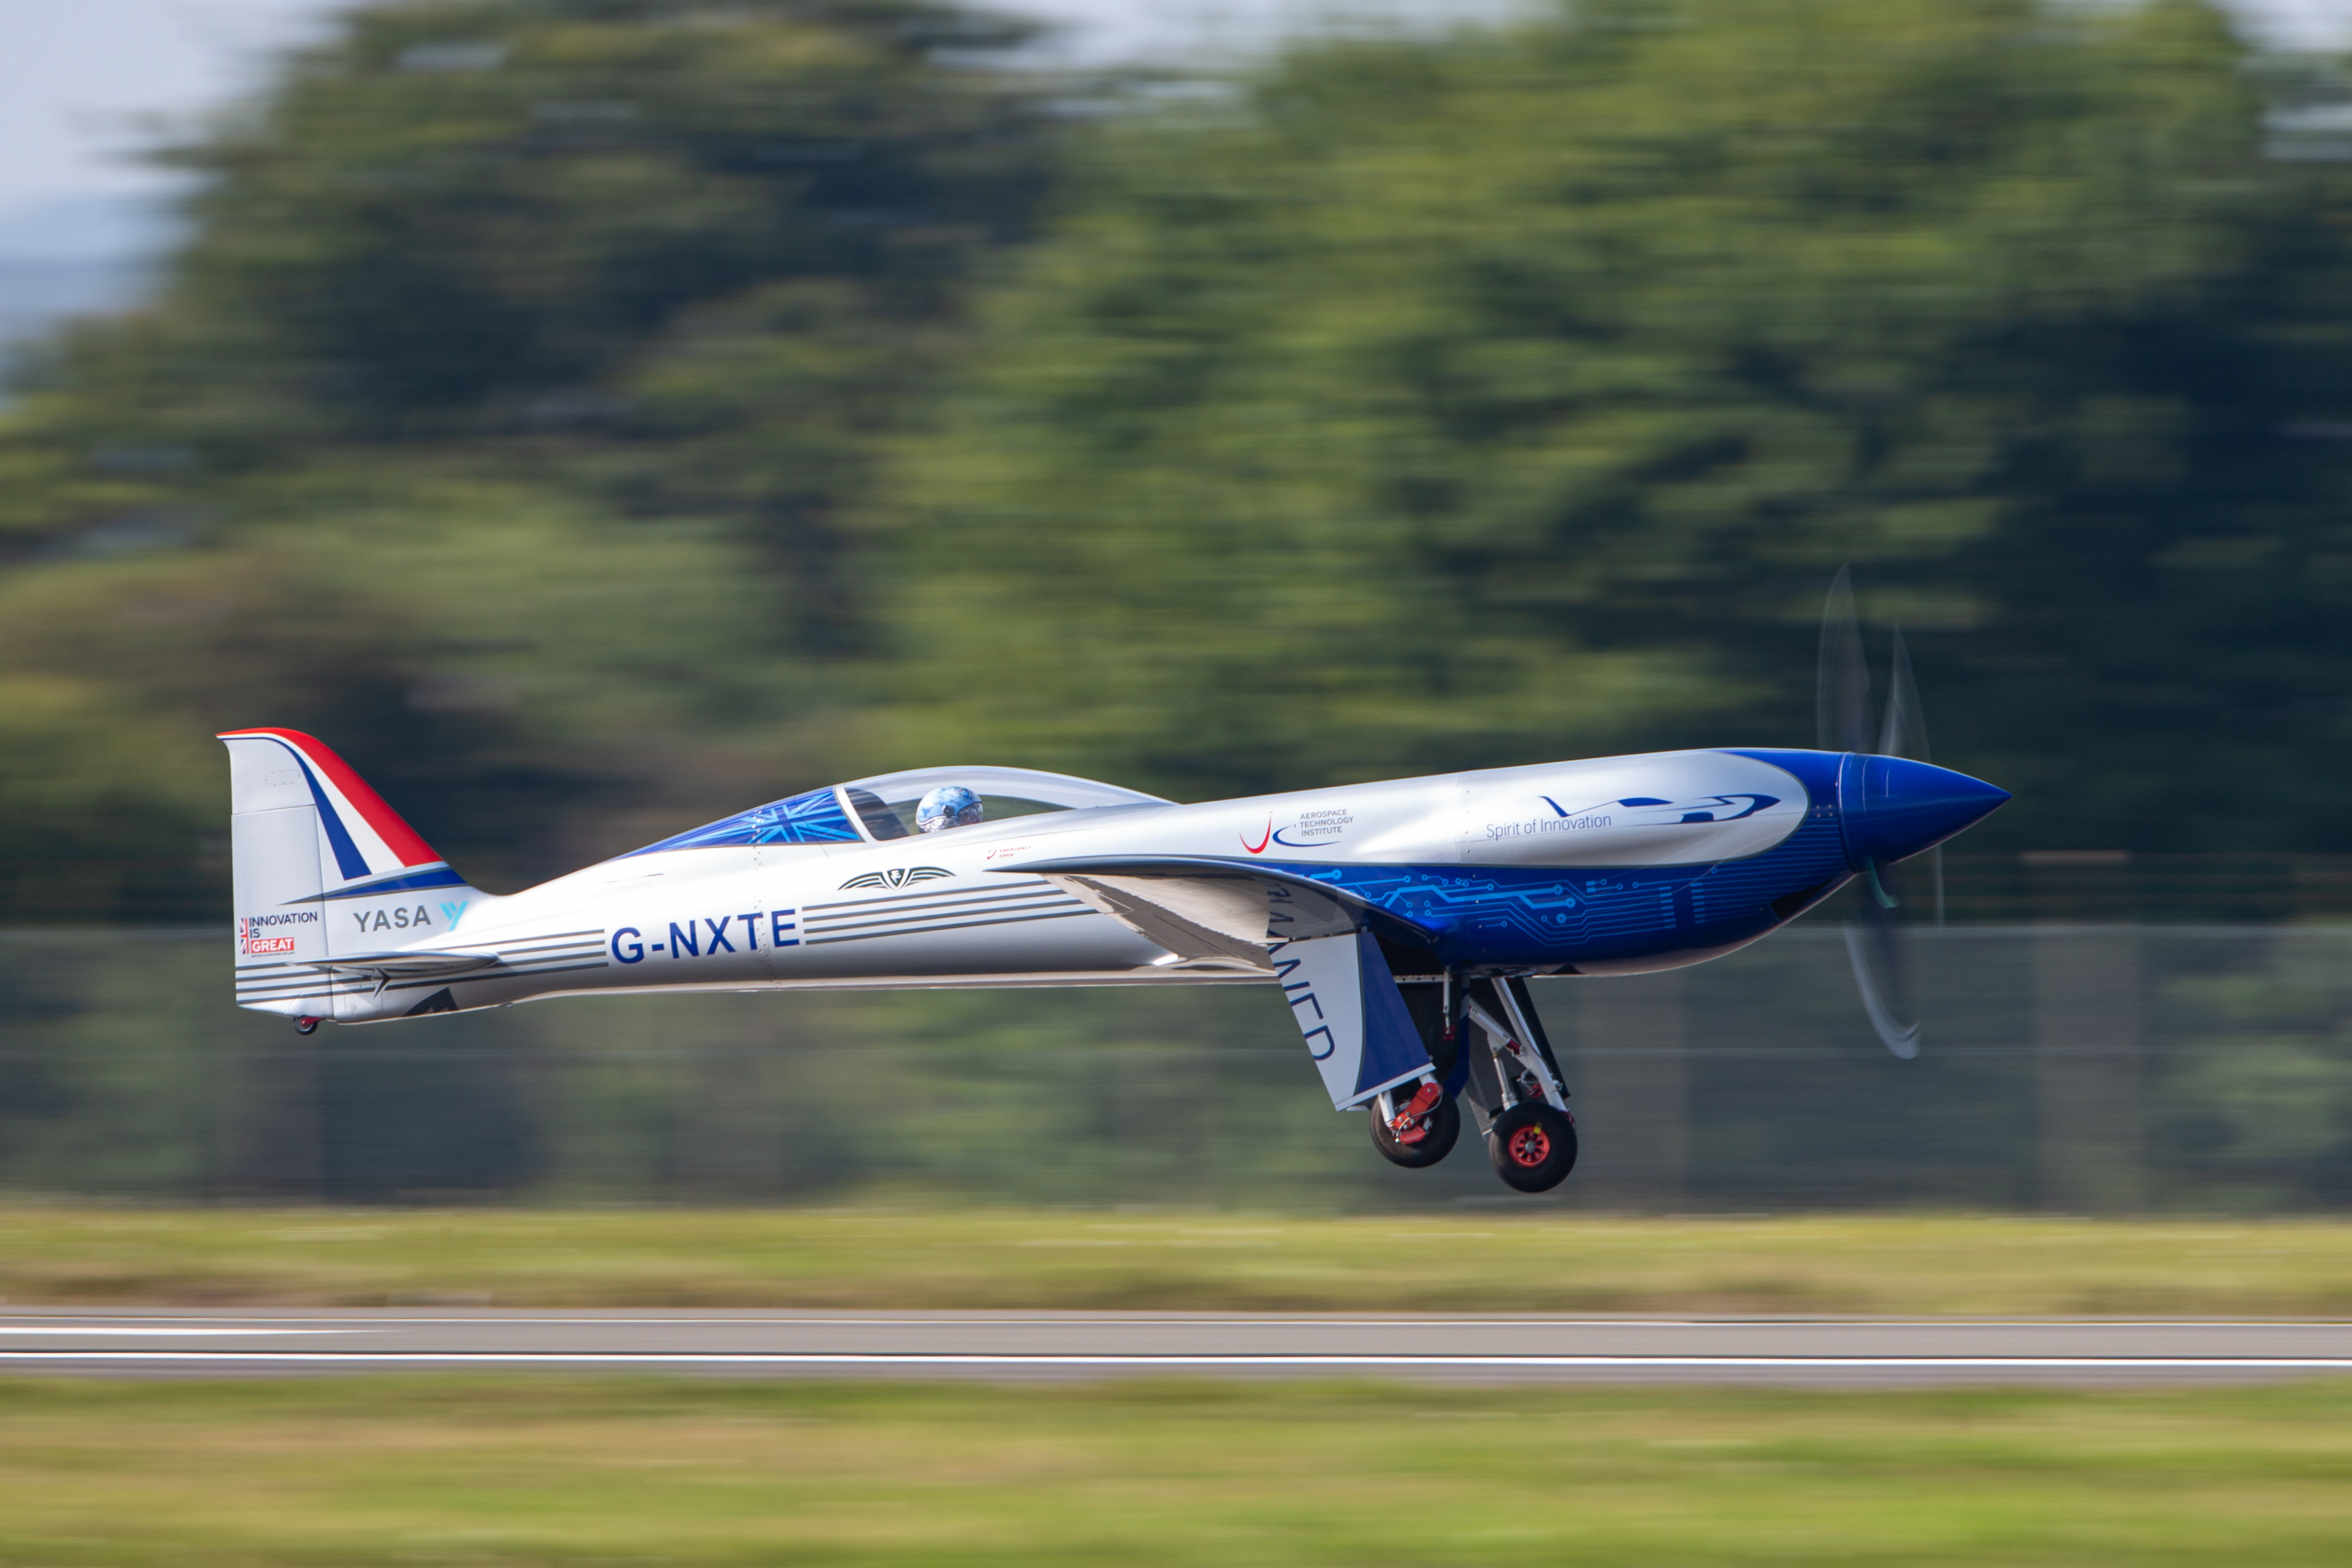 Rolls-Royce’s all-electric ‘Spirit of Innovation’ takes to the skies for the first time